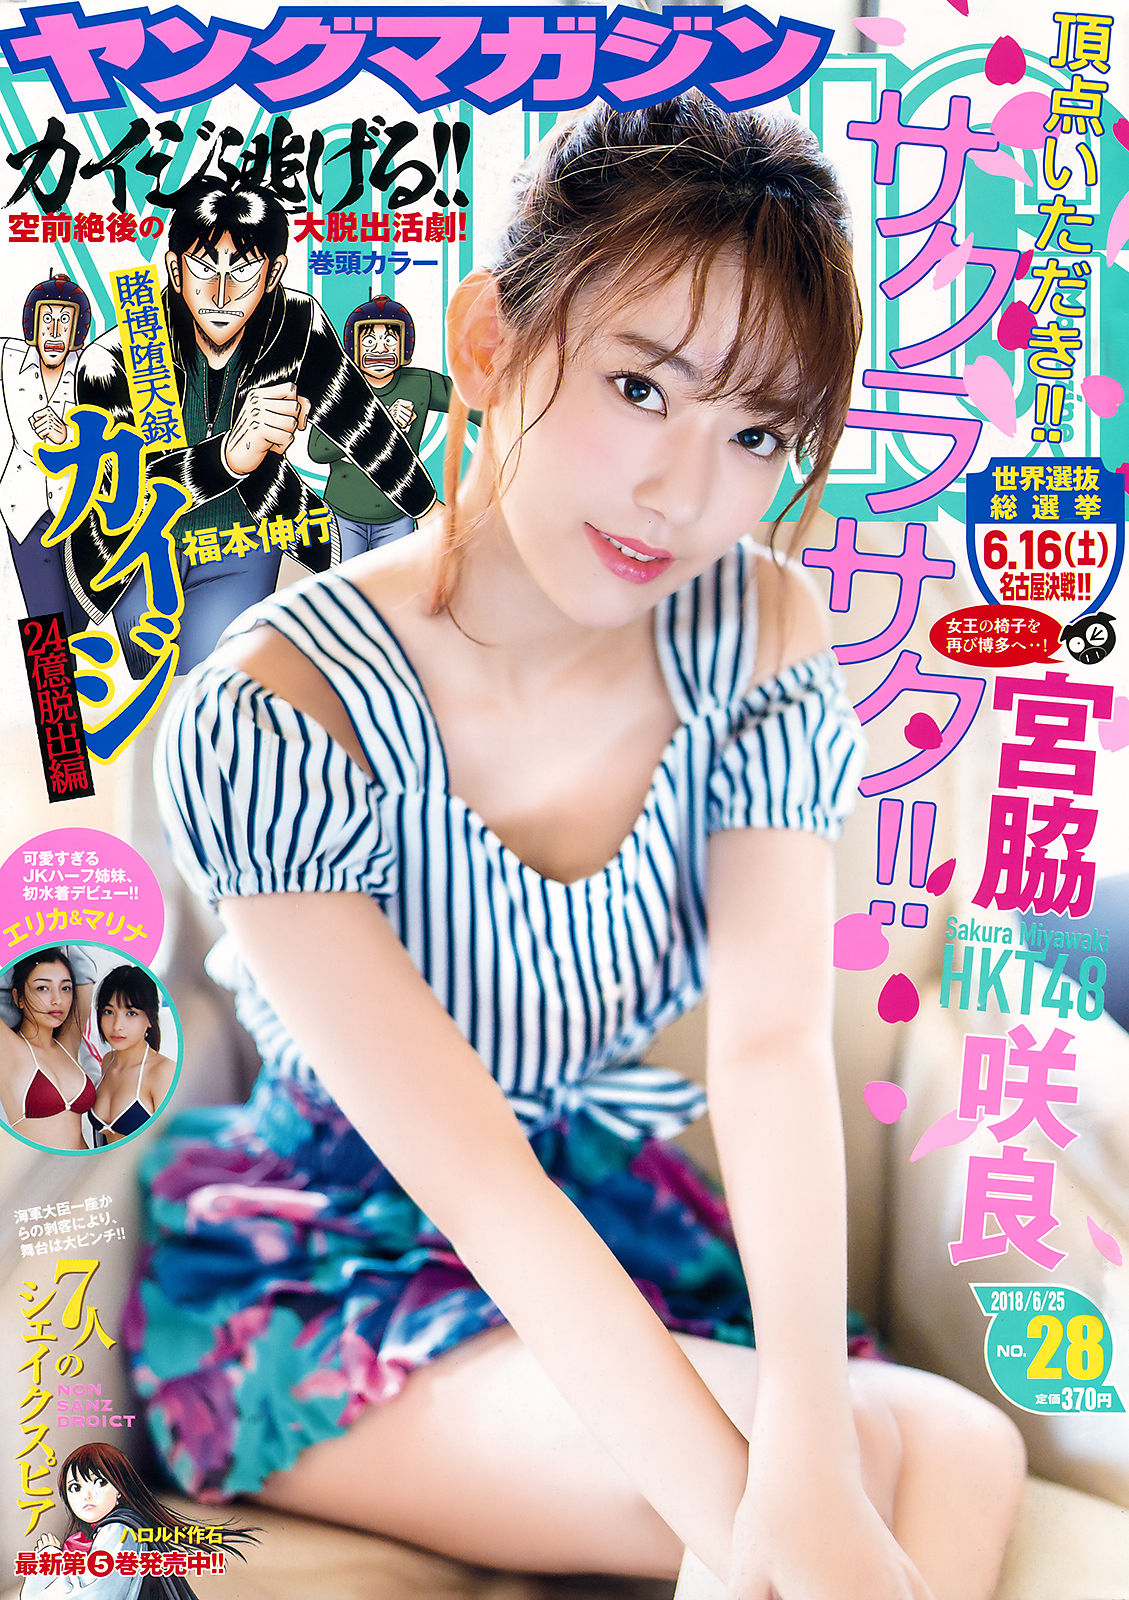 Young magazine. Мияваки Сакура 2022. き み か わ 結 衣 DVD Cover.